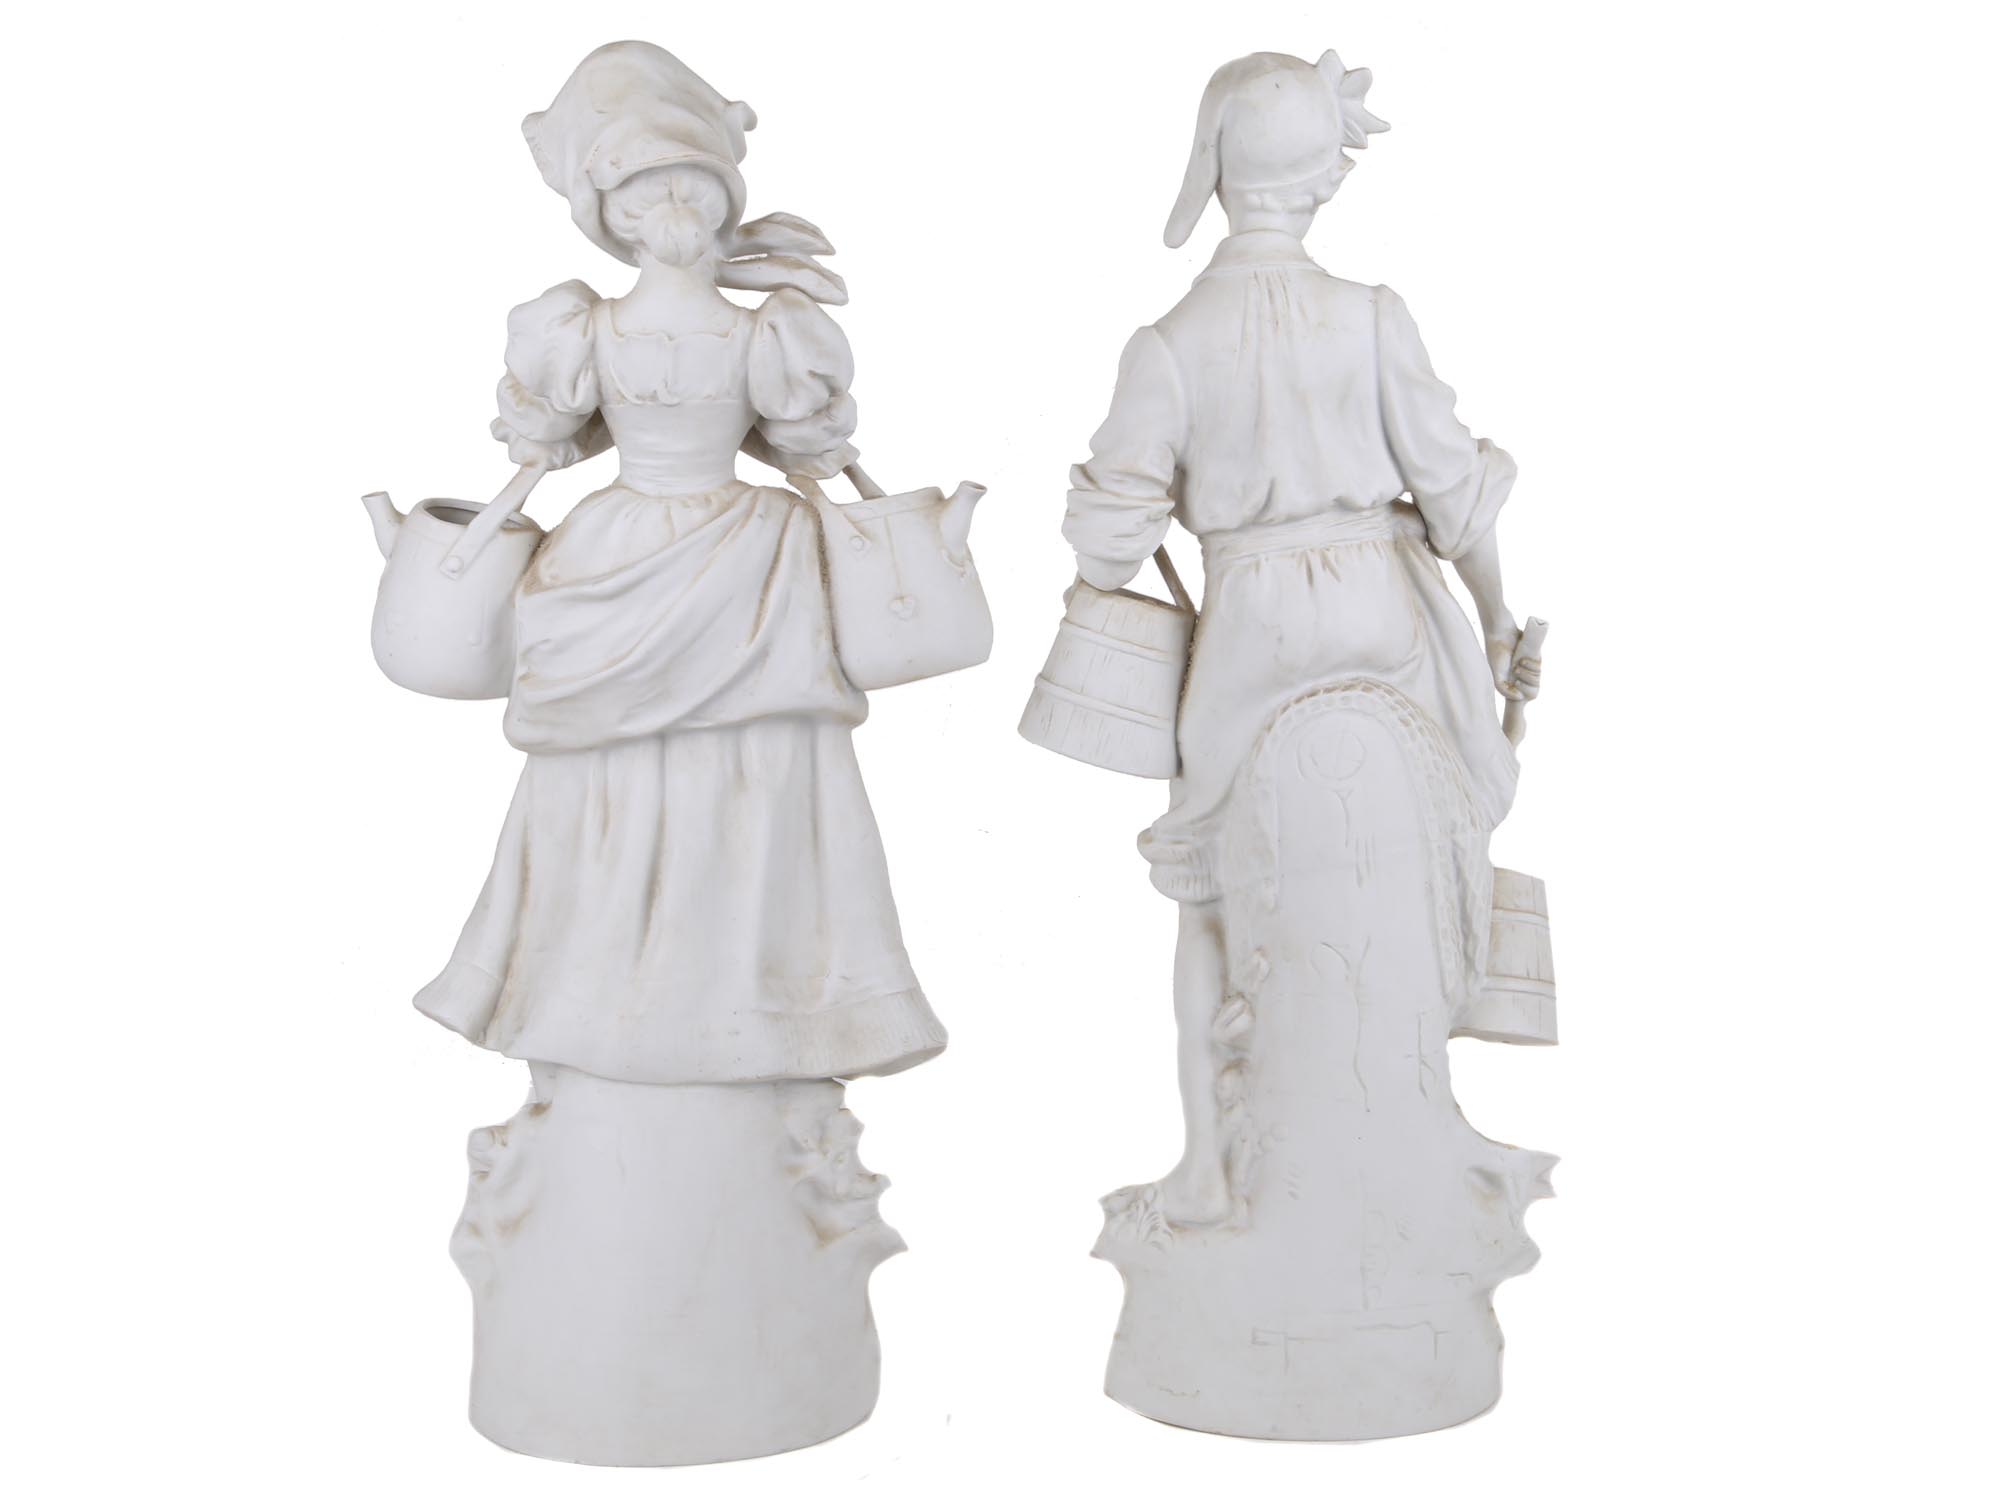 PAIR OF SEVRES STYLE BUSCUIT PORCELAIN FIGURINES PIC-1